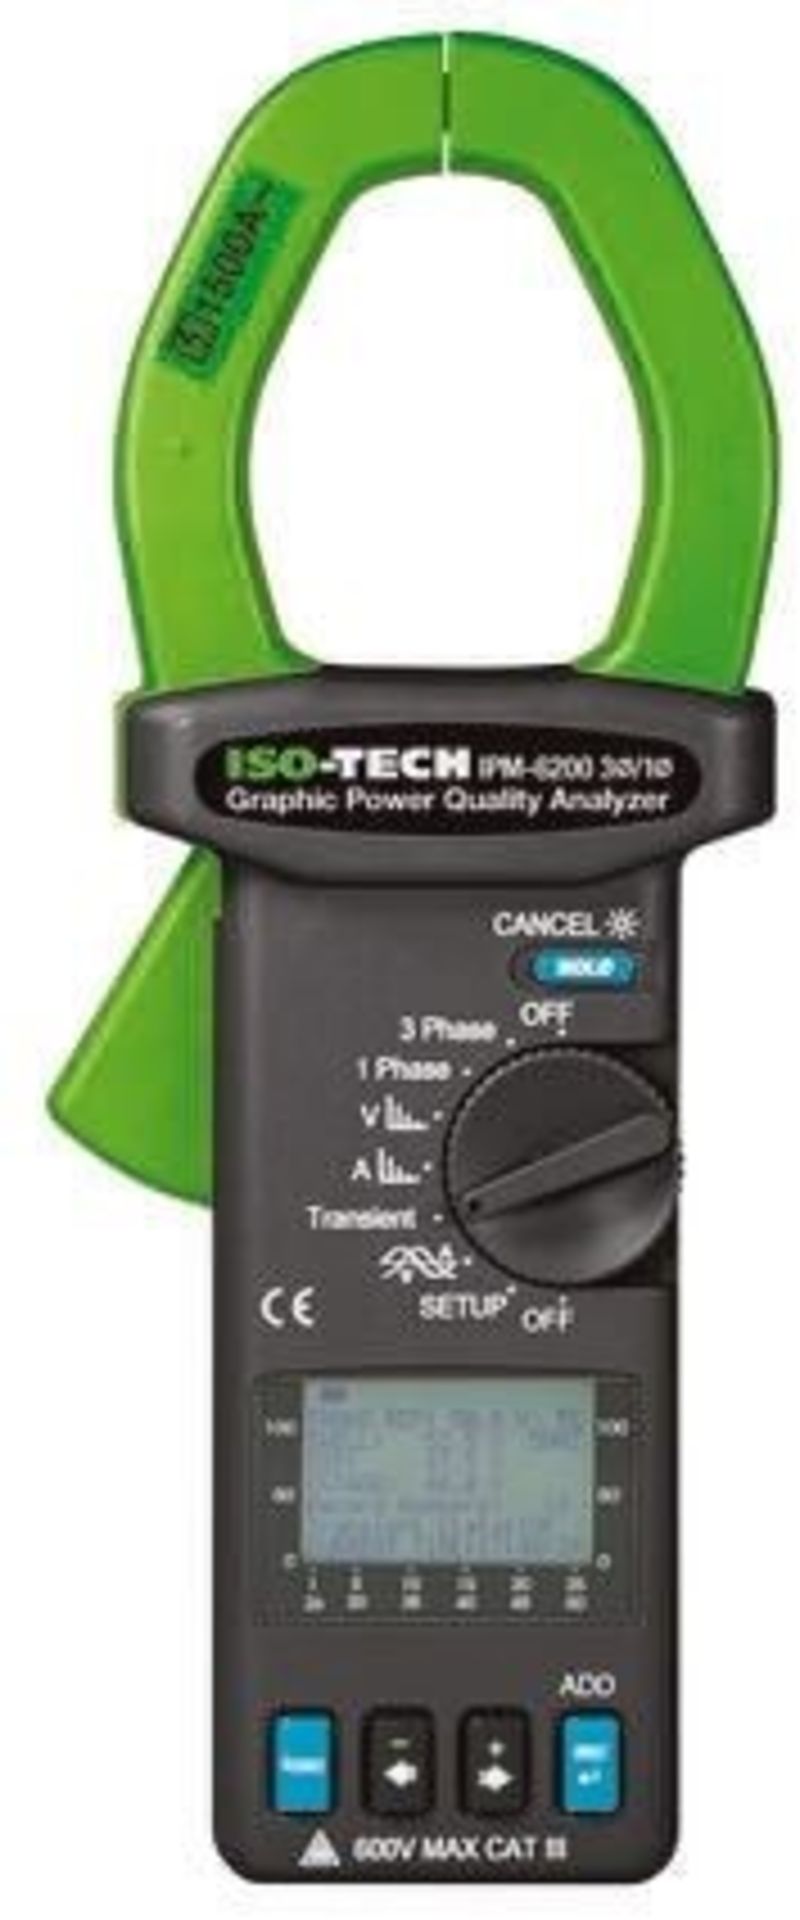 ISO-TECH IPM6200 1500A ac Power Quality Analyser - 6973755